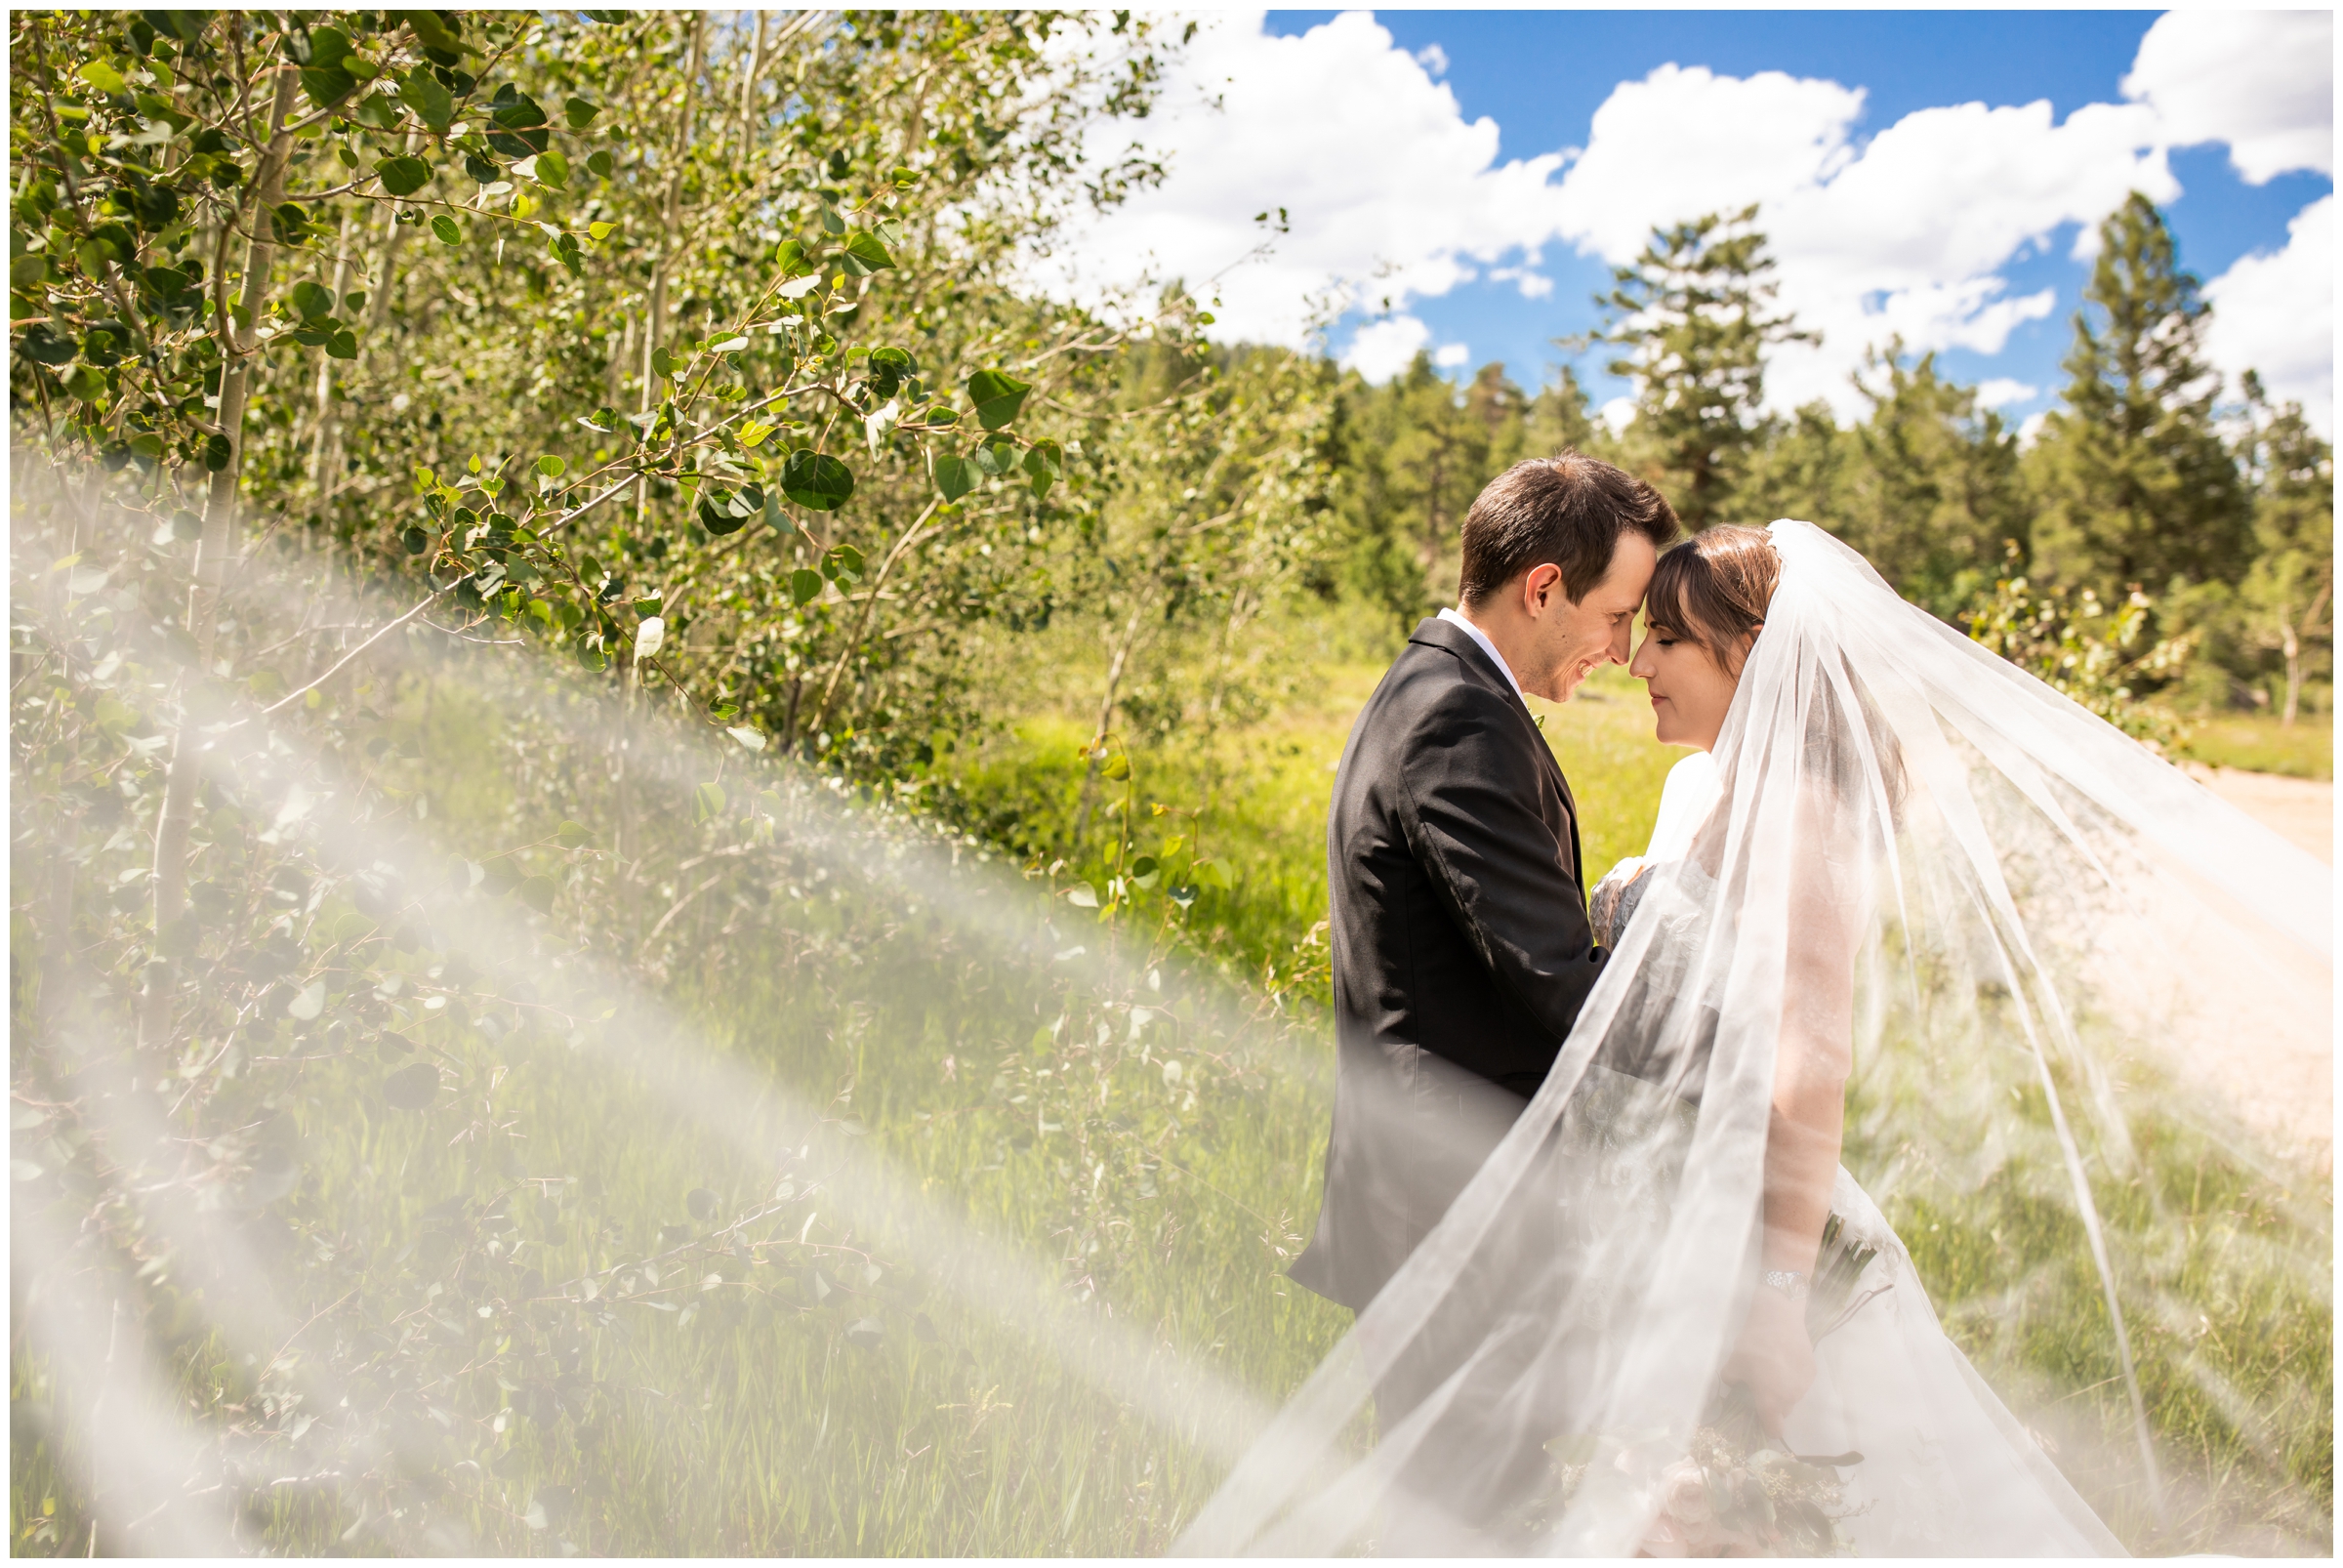 romantic wedding portraits with long cathedral veil during Estes Park Colorado mountain wedding pictures at Hermit Park 